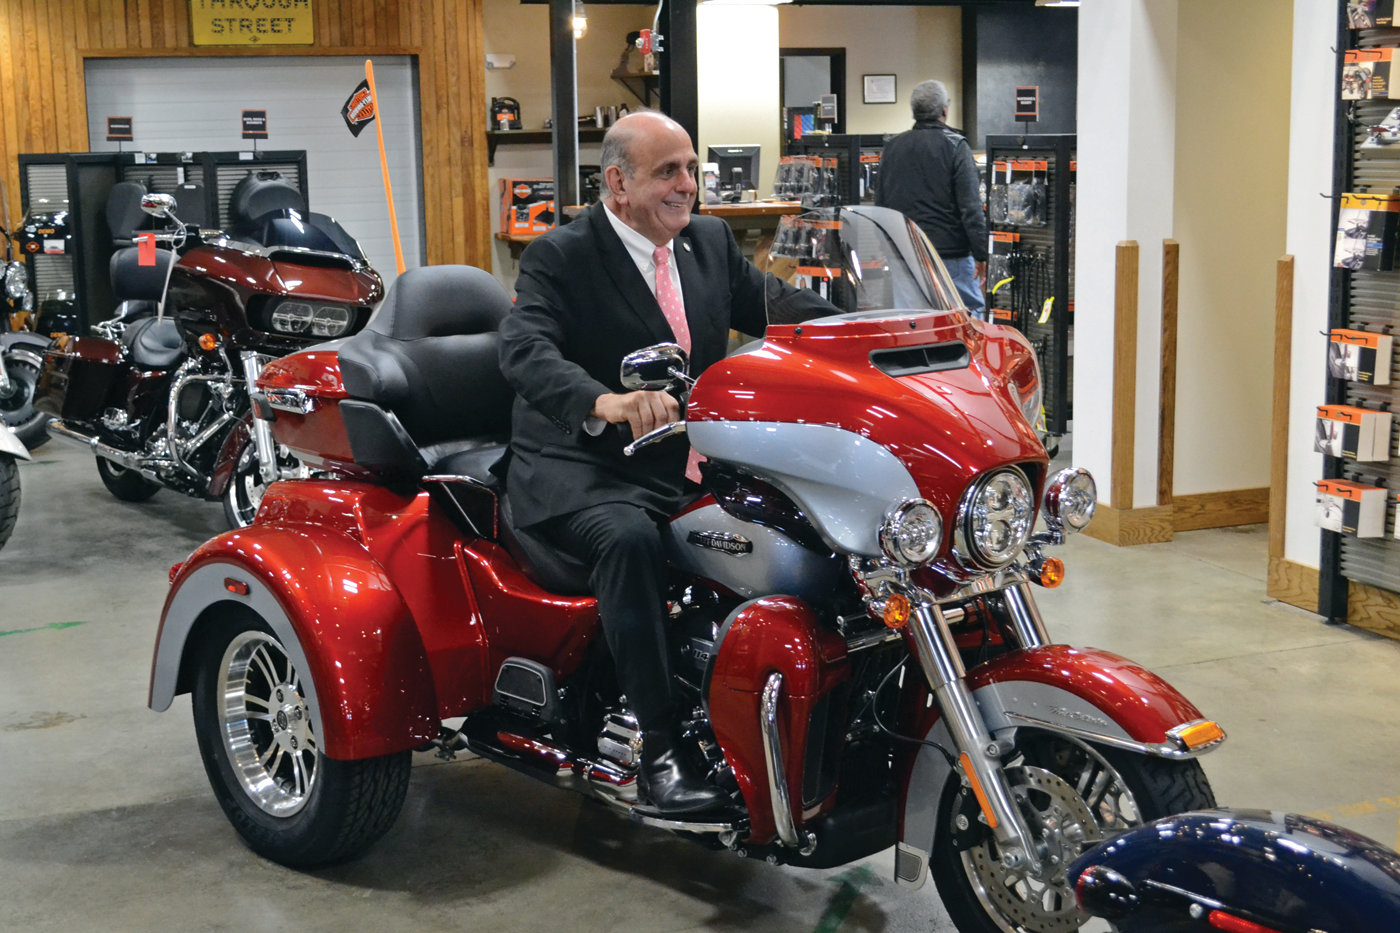 KID IN A CANDY STORE: Mayor Joseph Solomon was beaming like a child on his first bicycle behind the handlebars of this cherry red Tri-Glide, in the main showroom of Russ’ Ocean State Harley-Davidson.